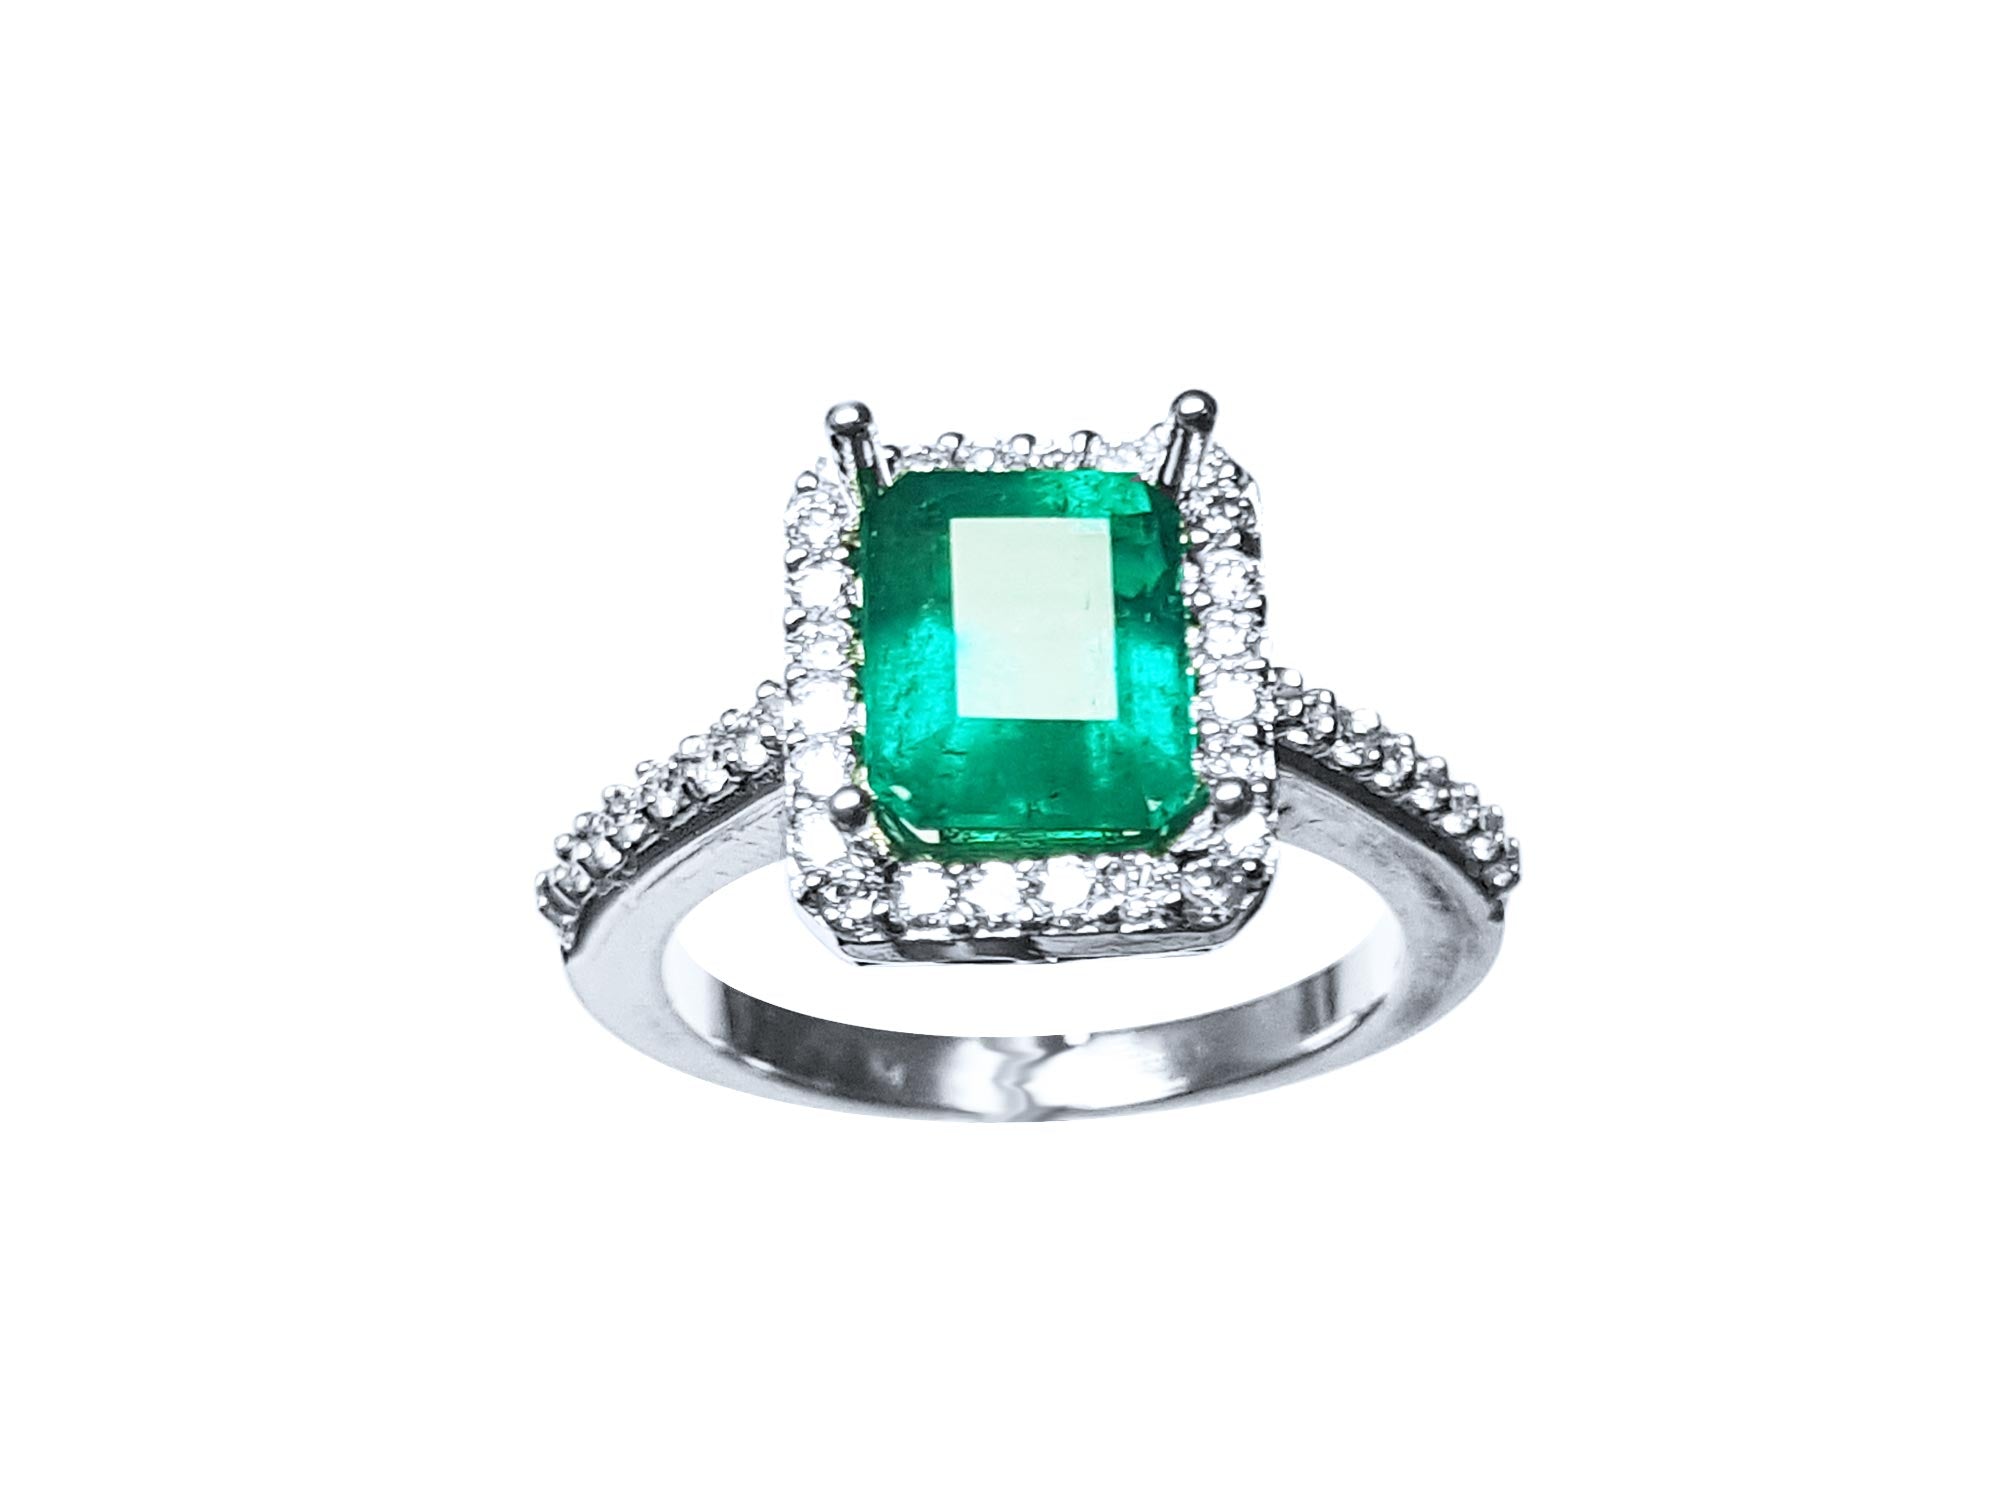 Real Colombian emerald for sae